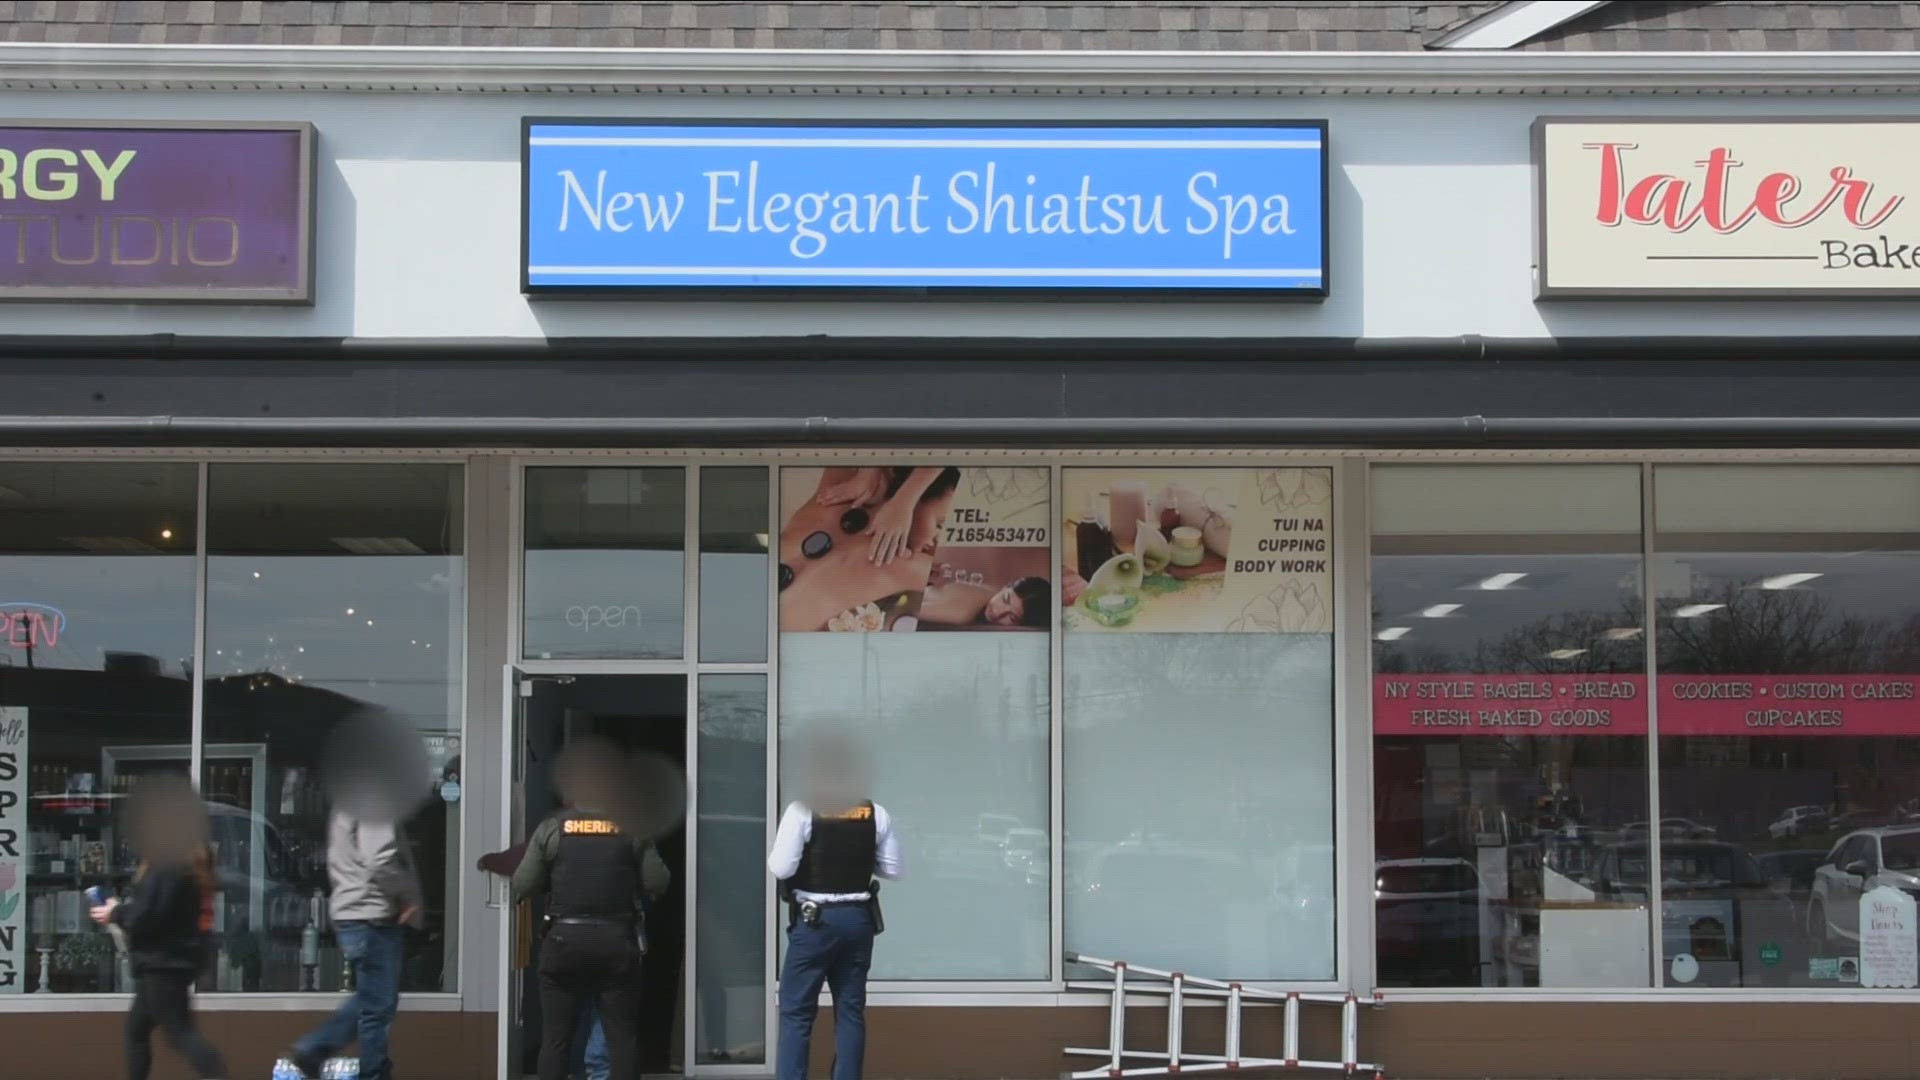 VIDEO SHOWS F-B-I AGENTS GOING INTO NEW ELEGANT SHIATSU SPA ON SOUTH TRANSIT ROAD.
THE F-B-I TELLS US THIS IS AN ONGOING MATTER... WE'L